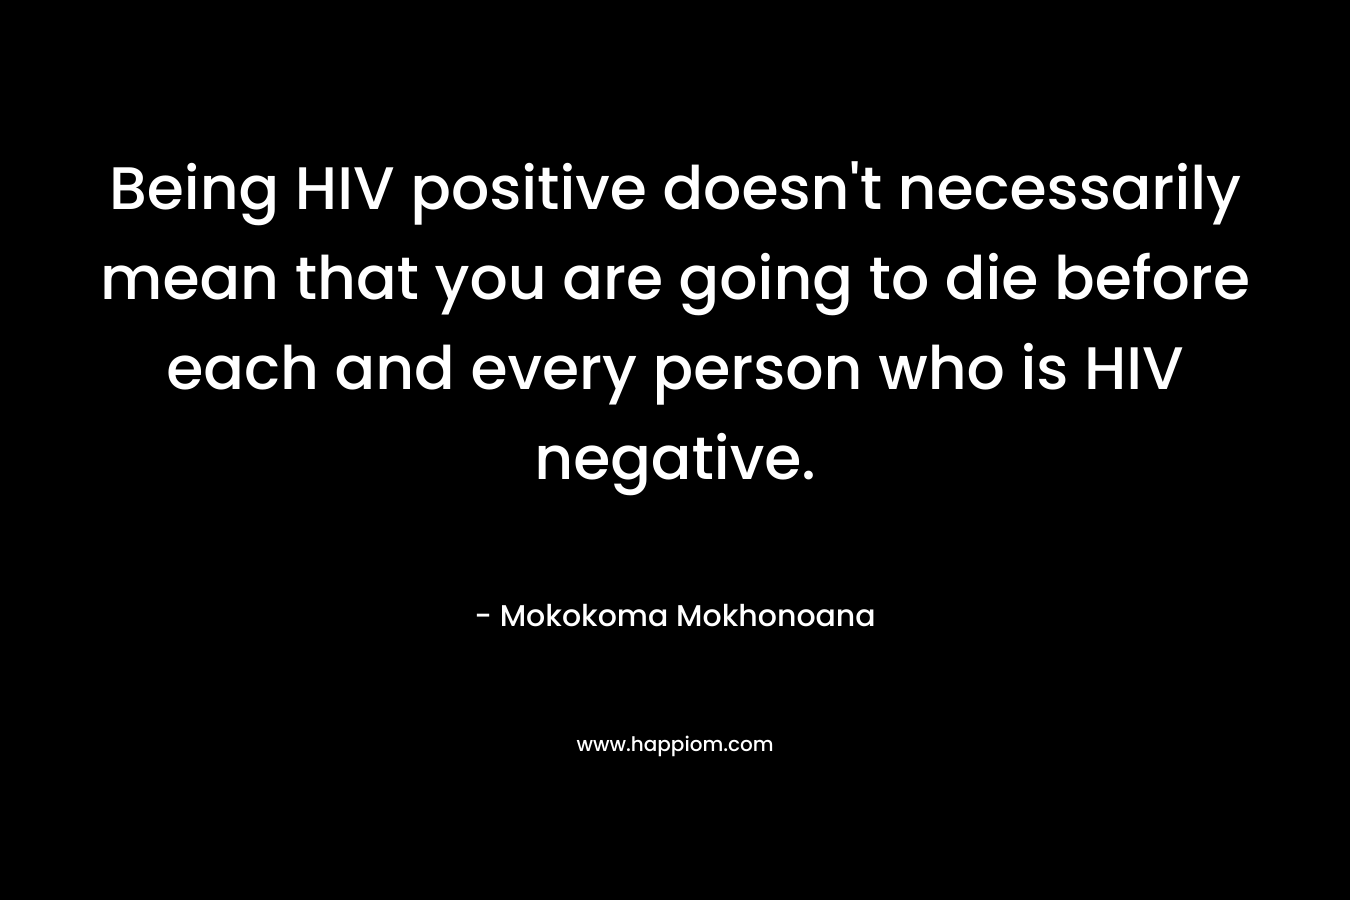 Being HIV positive doesn’t necessarily mean that you are going to die before each and every person who is HIV negative. – Mokokoma Mokhonoana